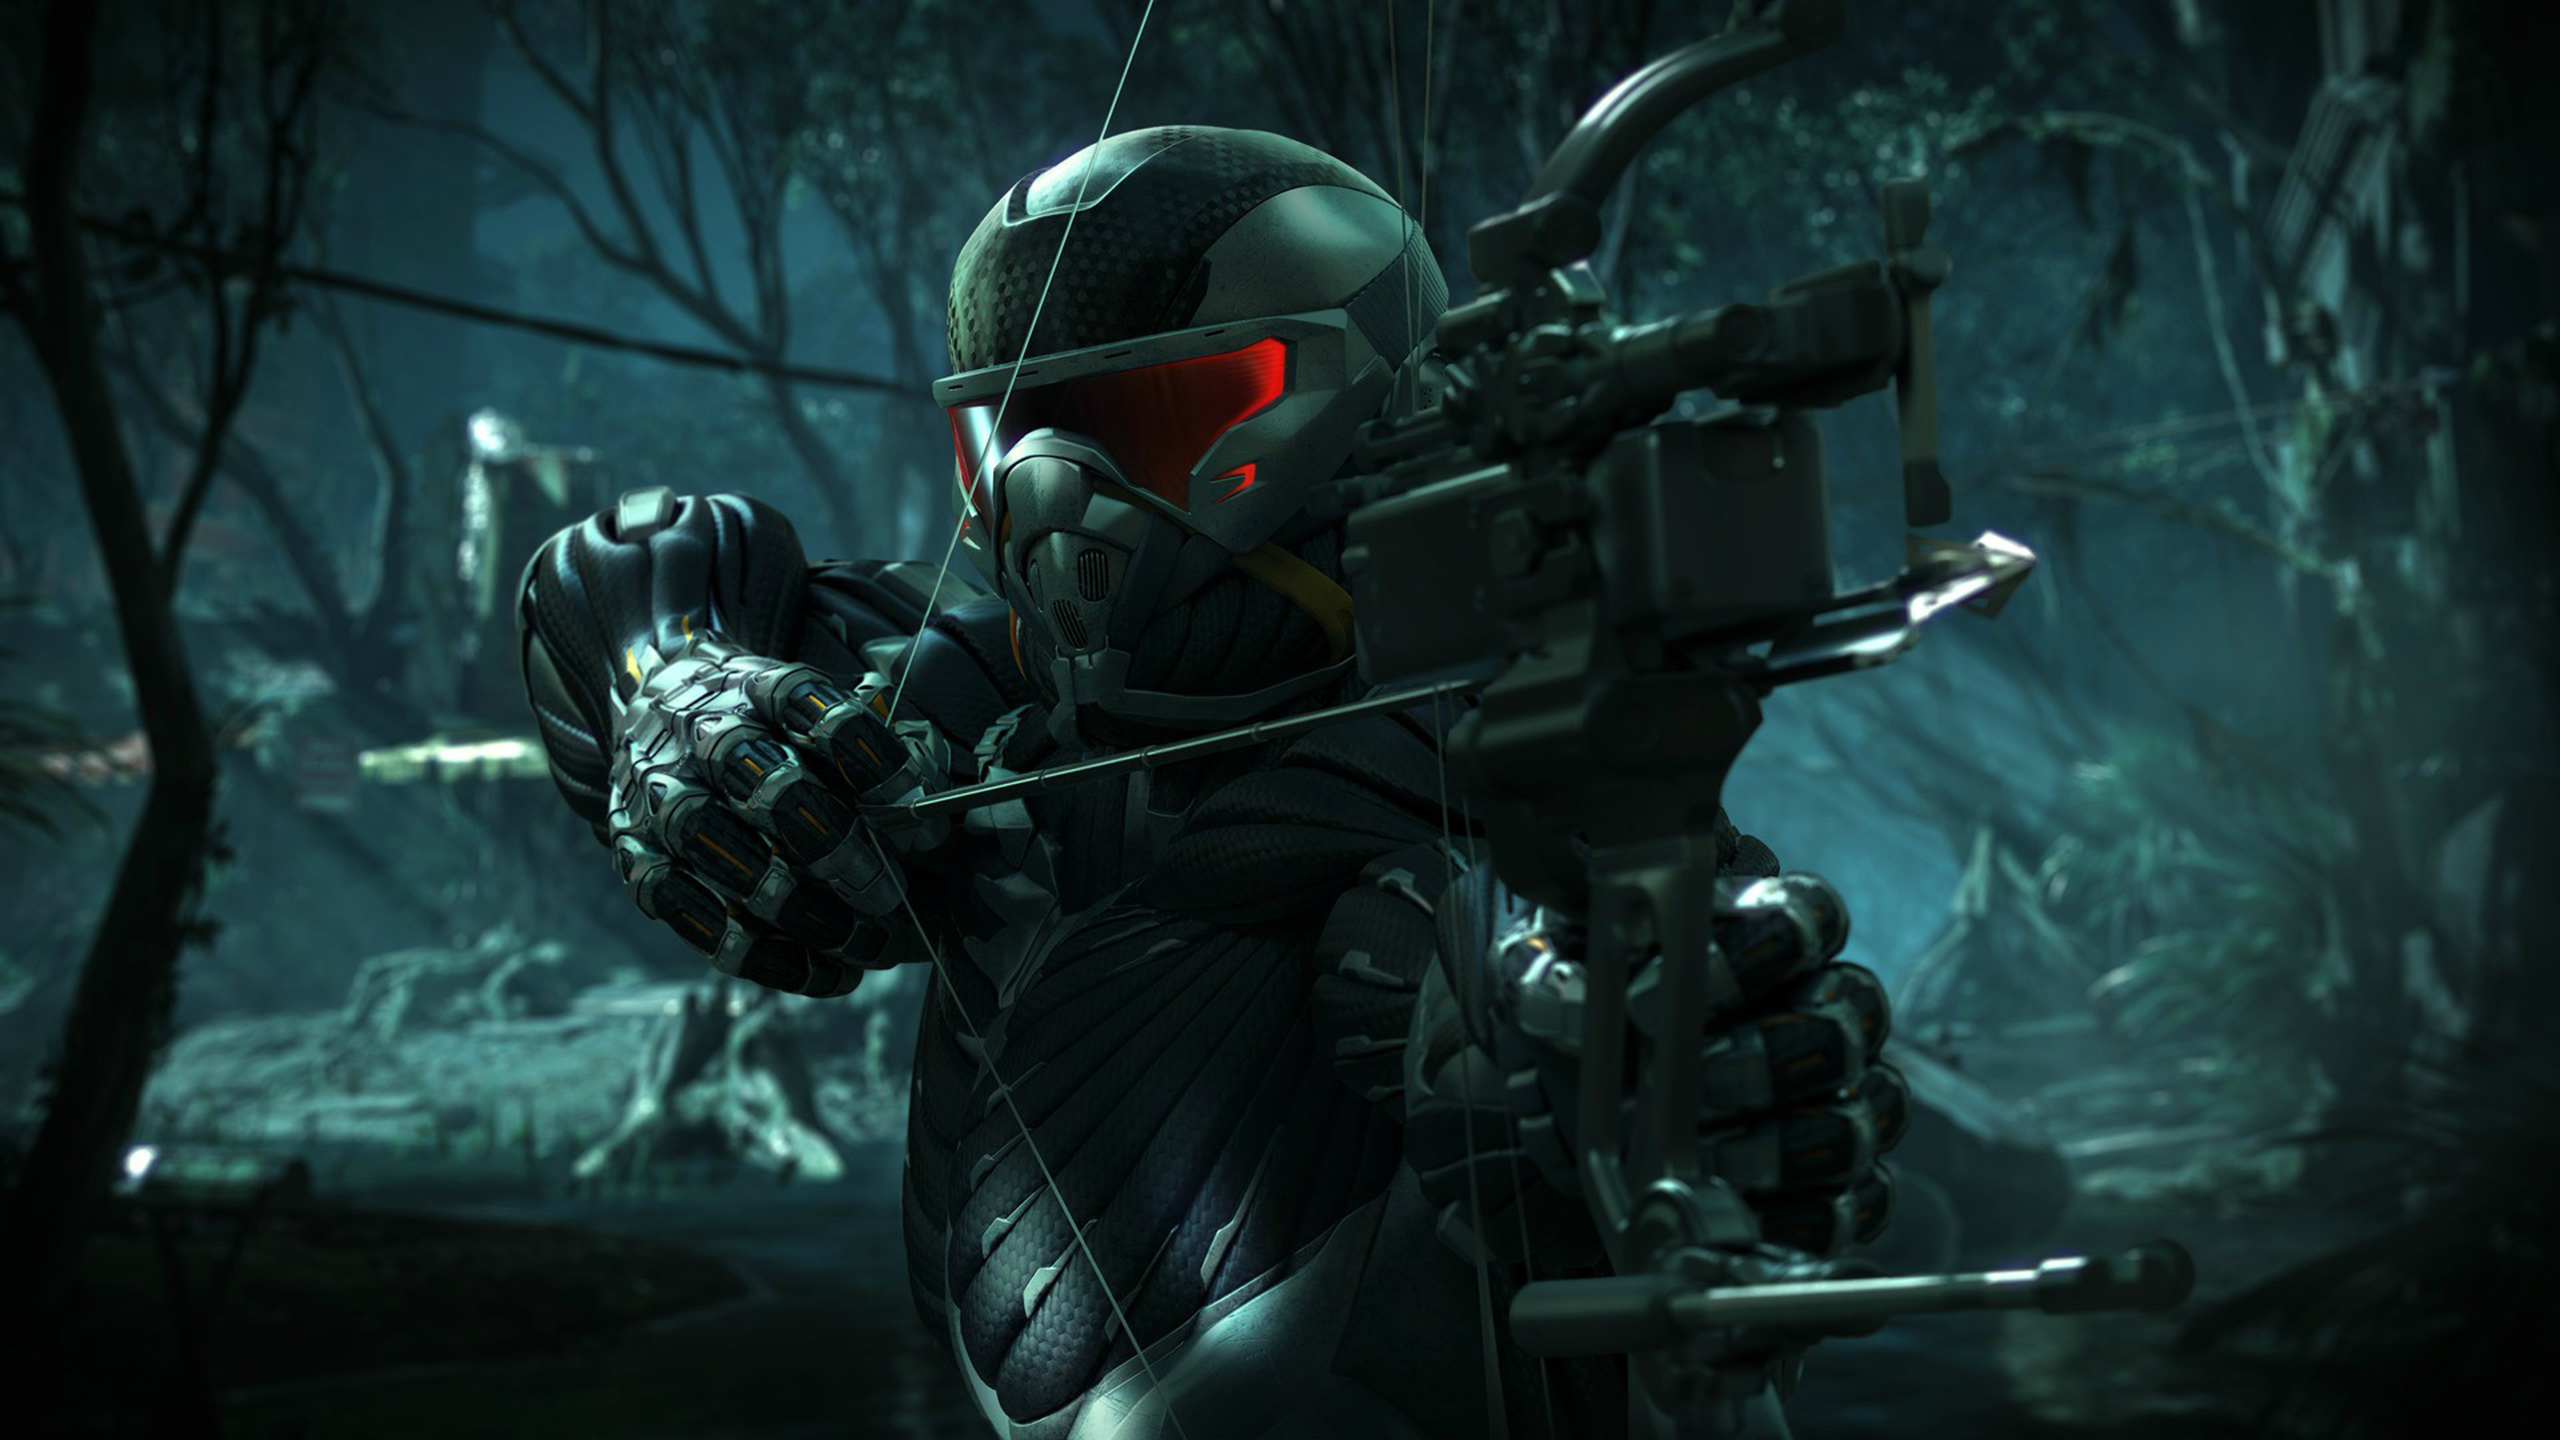 crysis, video game, crysis 3, laurence 'prophet' barnes cell phone wallpapers